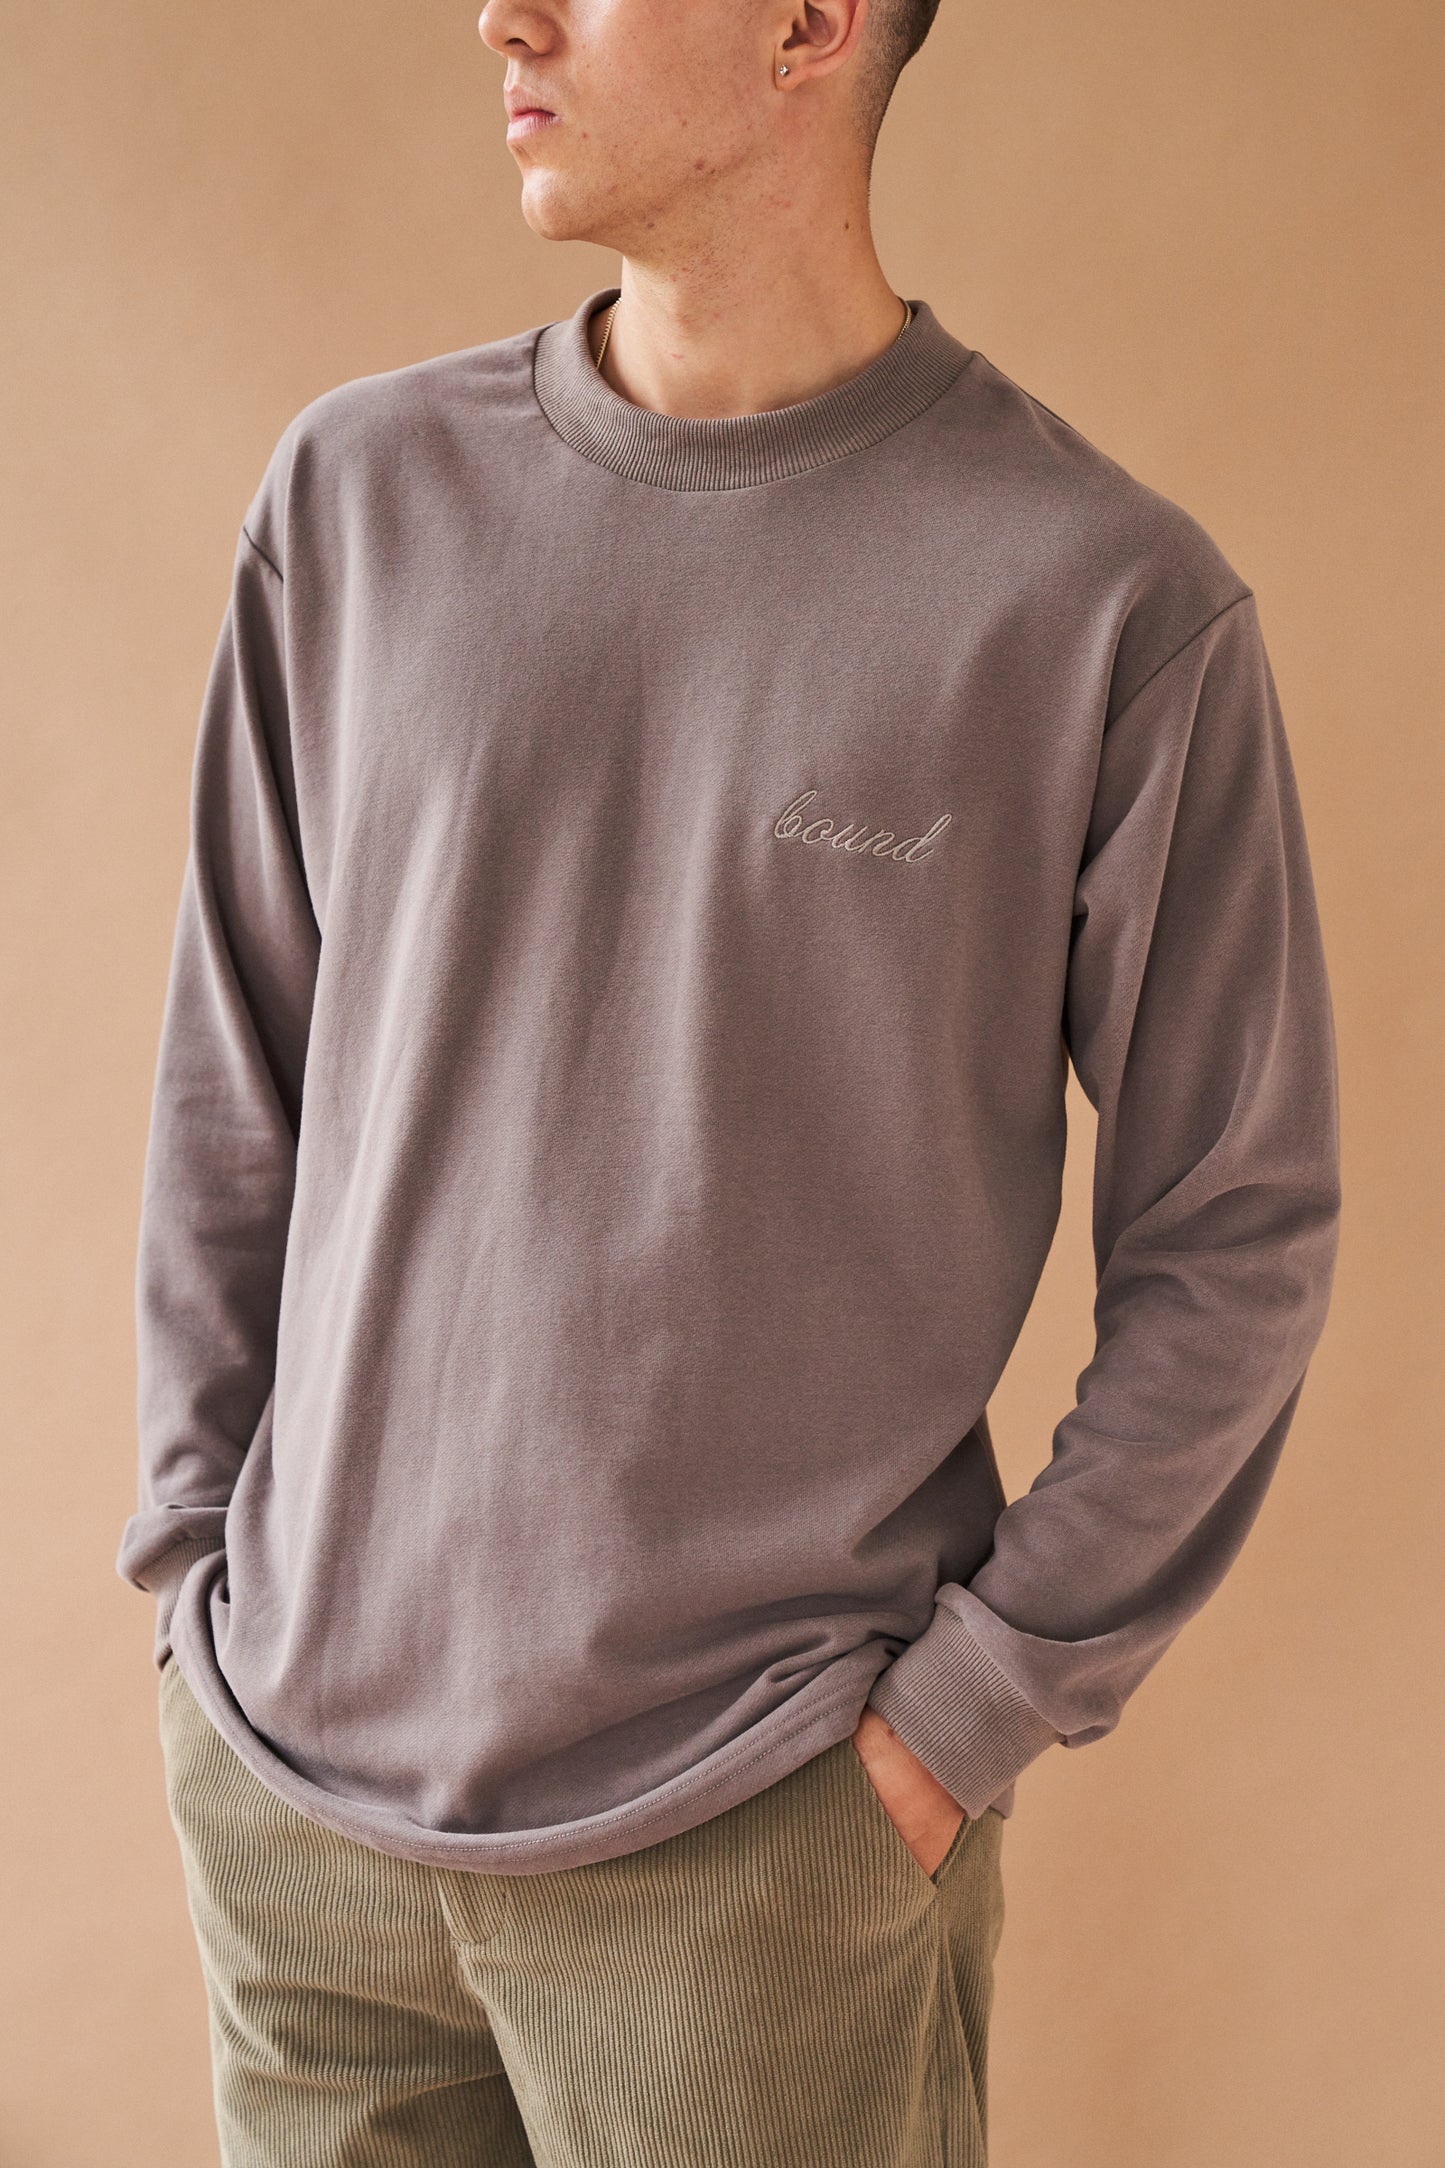 CHARCOAL SCRIPT EMBROIDERED LONGSLEEVE TEE